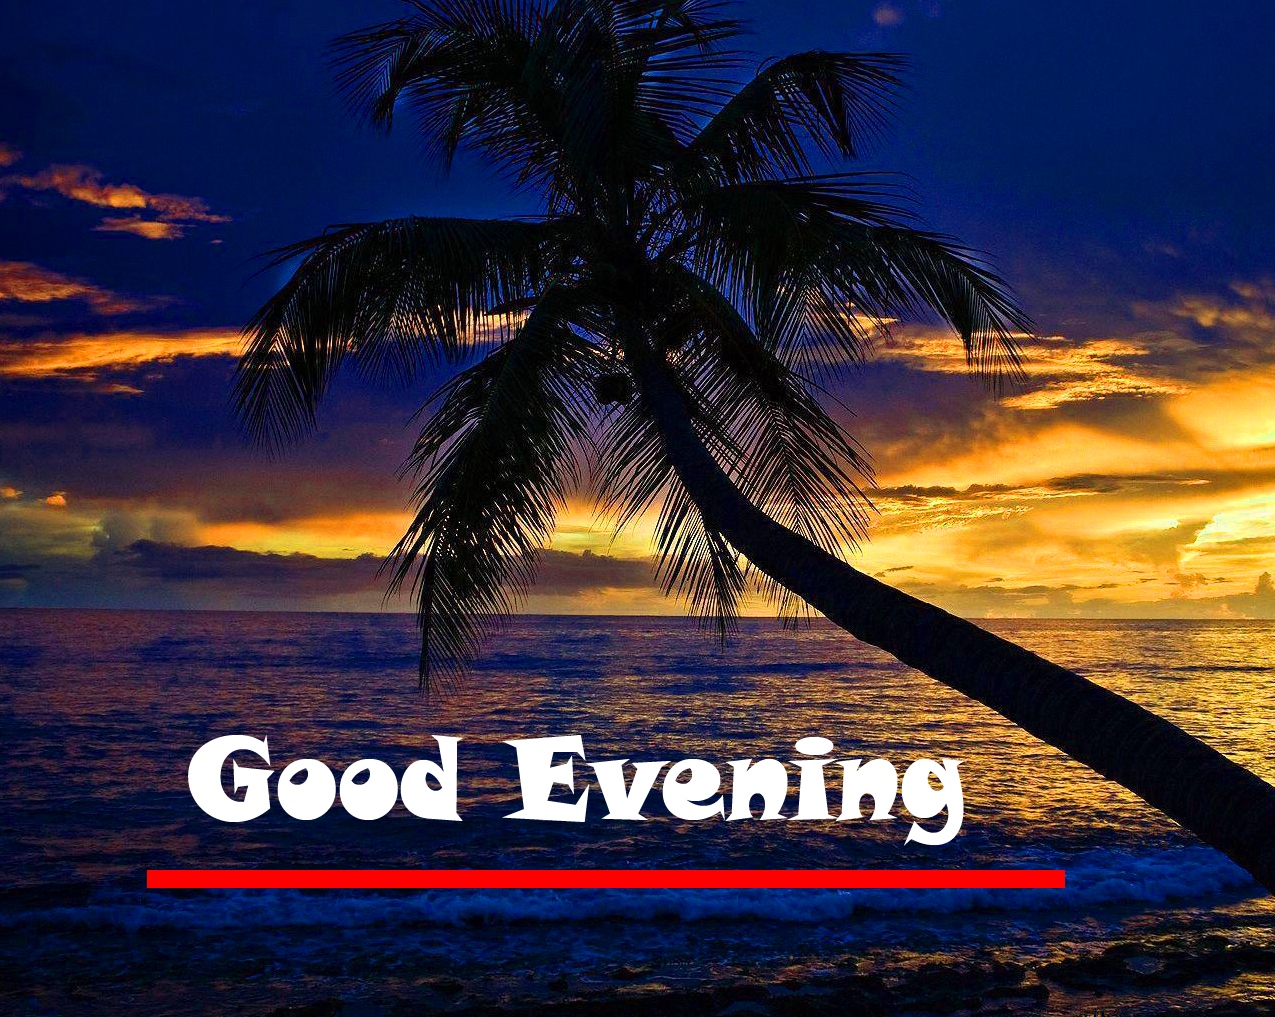 Free for Good Evening Images Pics for Facebook